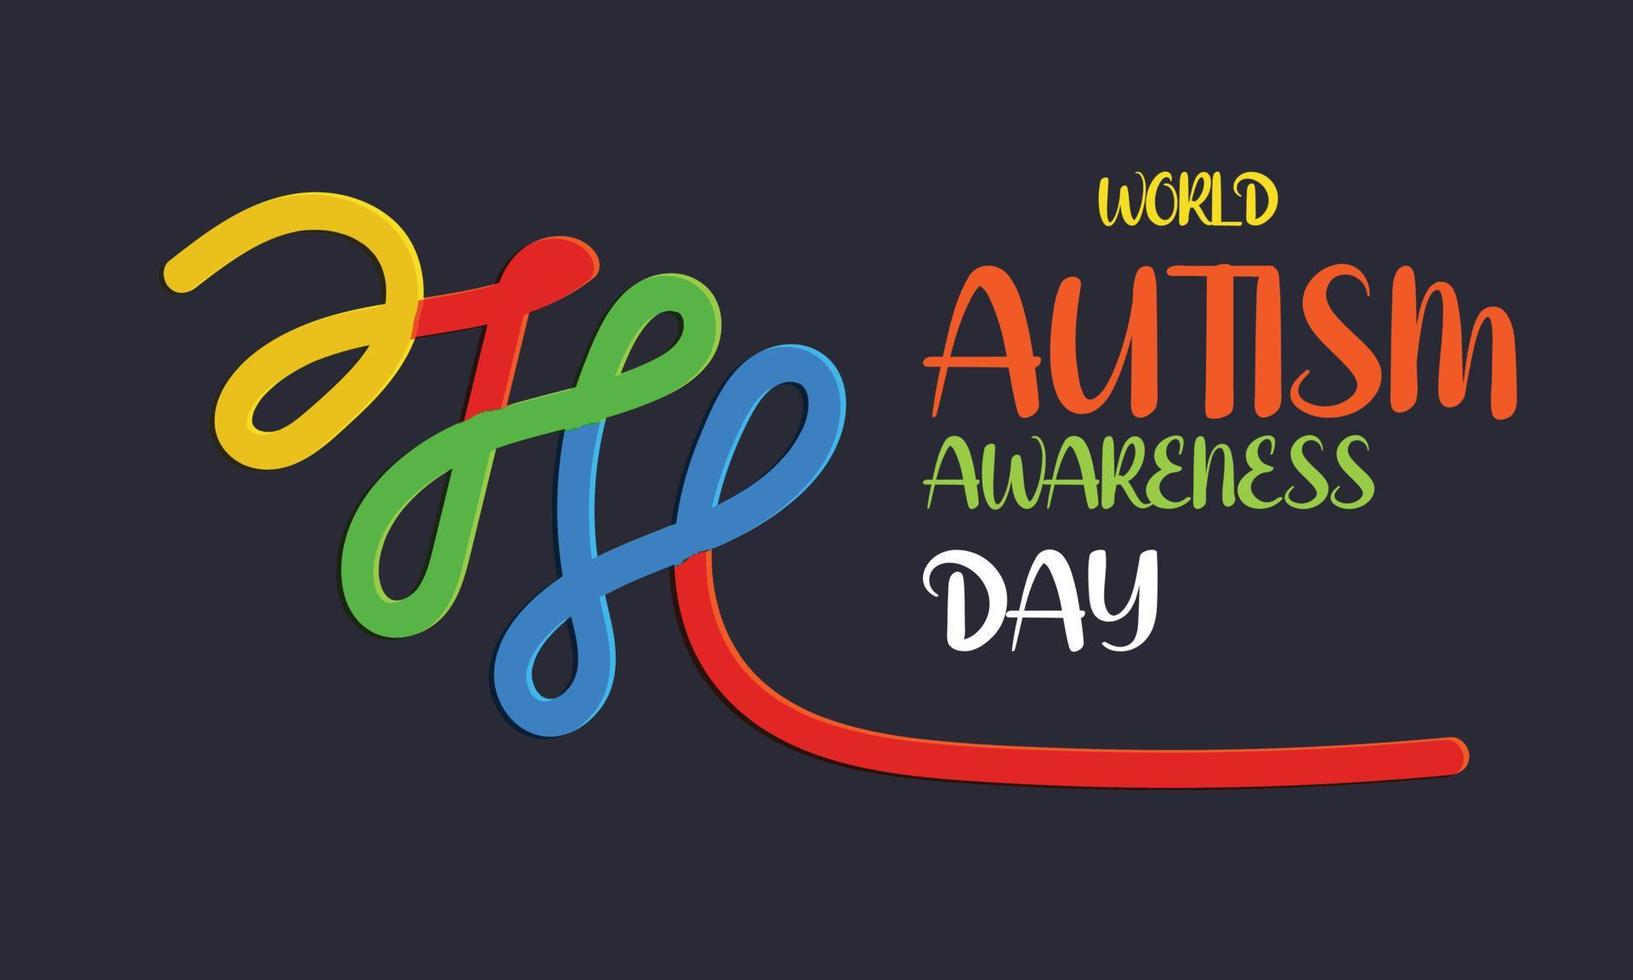 World Autism Awareness Day April 2. Template for background, banner, card, poster vector